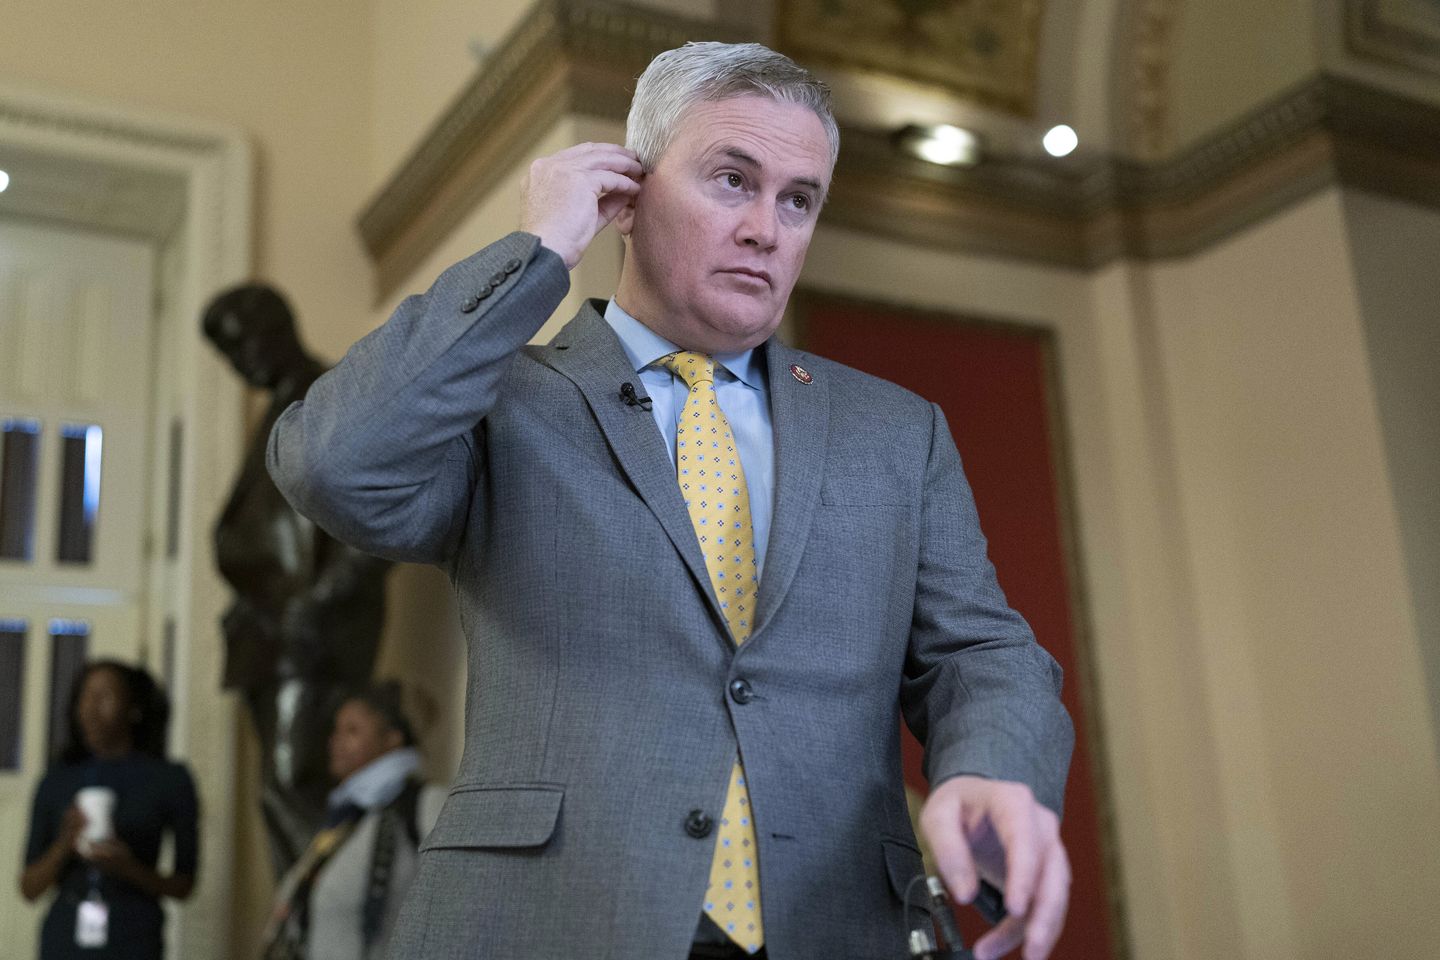 James Comer alarmed by White House 'secrecy' after more classified docs found at Biden home